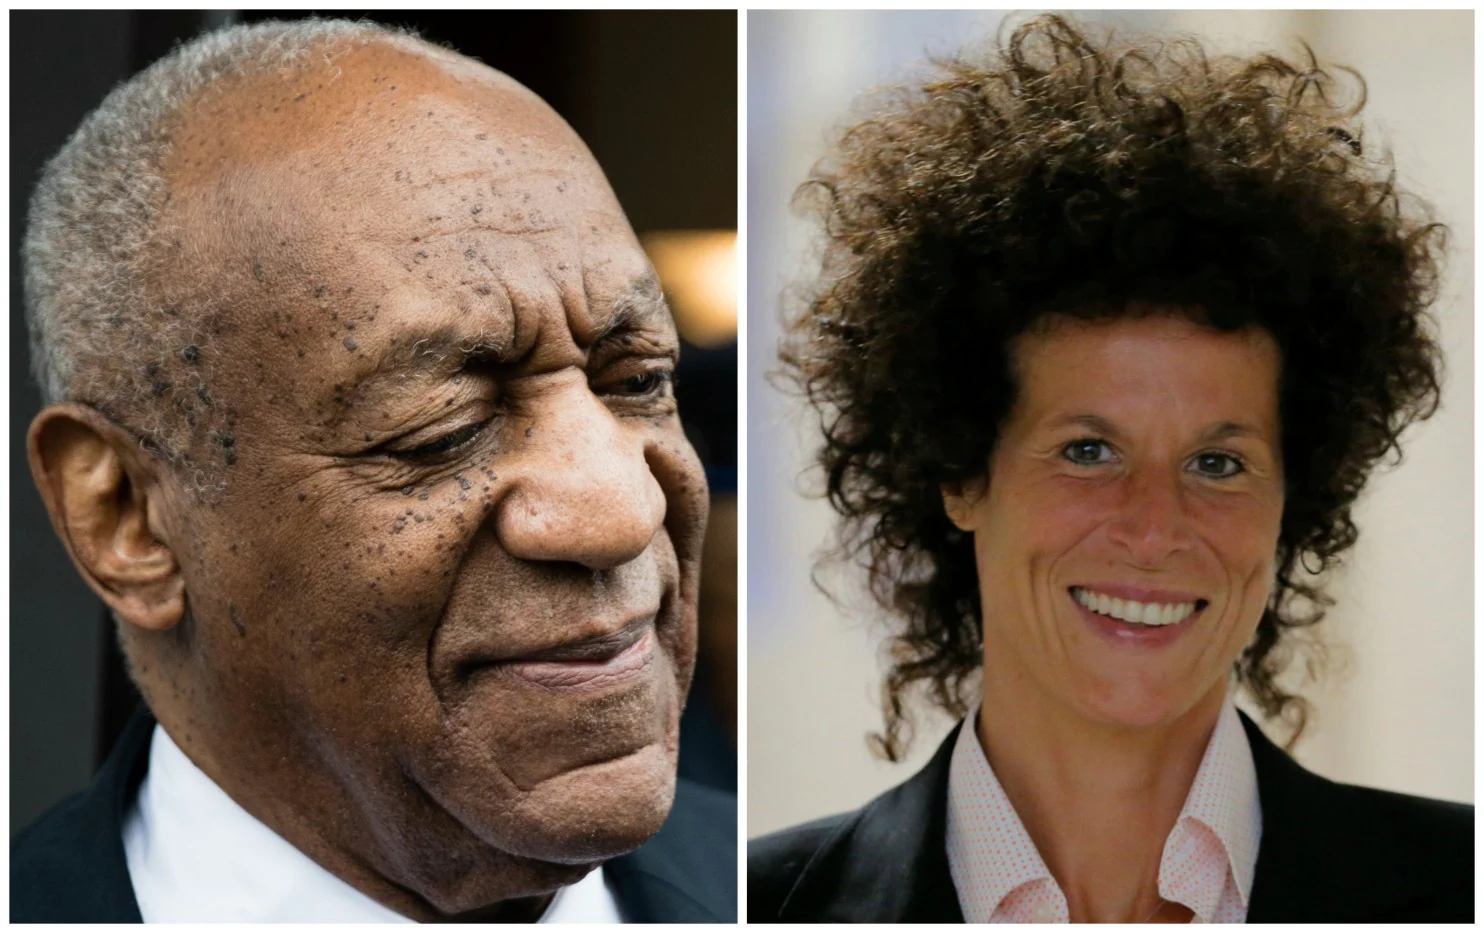 Bill Cosby Net Worth: $400 Million Age: 84 Years image source: nypost  Bill Cosby is a comedian, television performer, and producer from the United States. Bill Cosby's net worth is $400 million as of this writing. "The Cosby Show," which he created and starred in, is his most well-known work. In this post, we will cover Bill Cosby Net Worth along with various aspects of his life.  He was the highest-paid television actor in the world at the time of the show's peak. His base compensation for the show was $1 million every episode, but he earned $4 million per episode after factoring in his producing, creator, syndication, and other income streams. That works out to about $8 million each episode nowadays. He owned 20% of the show's equity, which resulted in hundreds of millions of dollars in syndication royalties over the years, however those earnings have essentially dried up in recent years as a result of his controversies.  In addition to royalties from other programmes and speaking engagement payments, Cosby invested in a highly significant real estate portfolio and art collection. The Cosby art collection and real estate portfolio might be valued more than $250 million at any given time, depending on their individual market valuations.  Bill Cosby’s Early Life  Bill Cosby was born on July 12, 1937, in Philadelphia, Pennsylvania, as William Henry Cosby Jr. His mother worked as a maid, and his father served in the US Navy as a mess steward. Cosby was the class clown as a teenager, but he was also the captain of the track and basketball teams. He also served as class president and performed in plays.  image source: time  After failing the 10th grade, Cosby dropped out and went to work as an apprentice in a shoe repair company. He entered the Navy in 1956 and served as a Hospital Corpsman for four years while earning his high school equivalency credential through correspondence classes.  In 1961, Cosby received a track and field scholarship at Temple University, where he studied physical education and ran track while also playing fullback for the football team.  Cosby continued to hone his sense of humor as he moved through his studies at Temple; he laughed with fellow enlistees in the military and subsequently with college pals. He became more aware of his capacity to make people laugh when he began bartending at a Philadelphia club to gain money, and he would entertain his customers with humor.  Bill Cosby’s Personal Life  Since 1964, Cosby has been married to Camille, with whom he has five children.  image source: hollywoodreporter  Ennis, their 27-year-old son, was killed in an attempted robbery while repairing a flat tyre on the side of the interstate in January 1997. Ensa, their daughter, died of renal illness in February 2018 while awaiting a kidney transplant. Cosby's lawyers revealed in 2016 that he is now legally blind.  Bill Cosby Comedy Career  In 1961, Cosby launched his stand-up performance in Philadelphia bars and later at The Gaslight Cafe in New York City. He then went on to do stand-up comedy in Chicago, Las Vegas, San Francisco, and Washington, DC.  His nationwide exposure on The Tonight Show in 1963 led to a run of popular comedy albums in the 1960s. Bill Cosby Is a Very Funny Fellow...Right!, his debut album, was released in 1964. Between 1965 and 1987, Cosby received seven Grammy Awards for Best Comedy Performance.  On Spin magazine's list of the 40 Greatest Comedy Albums of All Time, his album To Russell, My Brother, Whom I Slept With was named number one. Cosby created a reputation for himself by retelling amusing childhood stories. His stand-up breakthrough led to parts on The Dick Van Dyke Show and the action series I Spy, for which he won three Emmy Awards in a row.  The Cosby Show image source: britannica  The Cosby Show, one of the most popular comedies of all time, was created by Cosby in the 1980s. Cosby co-wrote, co-produced, and starred in the show, and he had a lot of creative influence over it. He was involved in every area of The Cosby Show's production.  The plots were frequently based on Bill's own family life, and the parallels didn't end there: Parents of five children, the main protagonists Cliff and Clair Huxtable, like Cosby and his real-life wife, were college-educated and financially wealthy. The show aired from September 1984 to September 1992, and it is one of only two sitcoms to have topped the Nielsen ratings for five seasons in a row.  Bill Cosby’s Sexual Assault Controversy  Since 2000, Bill Cosby has been accused of rape, sexual assault, child sexual abuse, and sexual battery by a large number of women. According to his accusers, the first assaults occurred in the mid-1960s. Cosby has frequently rejected the charges, claiming that the encounters were mutually agreed upon. The majority of the acts stated by his accusers were not covered by legal statutes of limitations.  image source: washingtonpost  Following the claims, practically everyone associated with the Bill Cosby brand cut connections with him. The Cosby Show reruns and other programmes starring Bill were withdrawn from the airwaves. In 2015, Cosby was the subject of eight legal lawsuits, which grew to 33 by the end of the year.  Bill Cosby was convicted guilty of three counts of aggravated sexual assault by a jury in Pennsylvania on April 26, 2018. He was sentenced to three to ten years in state prison in September 2018. In January 2019, he was moved from administrative segregation to the general population at SCI Phoenix in Pennsylvania, where he had been confined to a single cell in administrative segregation. Cosby's appeal to have his conviction overturned was denied in December 2019.  Real Estate image source: radaronline  Bill's real estate holdings are valued at more than $100 million. He has substantial real estate in both Pennsylvania and Beverly Hills. Based on comparable recent transactions, his Beverly Hills mansion alone could be worth $60 million. It could be closer to $80 million.  5 Unknown Facts about Bill Cosby Cosby worked as a Hospital Corpsman in physical therapy with Navy and Marine Corps servicemen injured during the Korean War during his four years in the Navy. Bill Cosby: Himself, a concert film he released in 1983, is widely regarded as "the finest comedic concert film ever." On May 2, 2015, Cosby's final show of the "Far From Finished" tour took place at the Cobb Energy Performing Arts Centre in Atlanta, Georgia. On January 25, 1964, Cosby married Camille Olivia Hanks. Erika, Erinn, Ensa, Evin, and Ennis are the couple's five children. Cosby became legally blind in 2016, according to reports. Famous Quotes by Bill Cosby  In this post of Bill Cosby Net Worth, here are some of his famous quotes that you need to see-  “Every closed eye is not sleeping, and every open eye is not seeing.” - Bill Cosby  “Always end the name of your child with a vowel, so that when you yell the name will carry.” - Bill Cosby  “The past is a ghost, the future a dream, and all we ever have is now.” - Bill Cosby  “The truth is that parents are not really interested in justice. They just want quiet.” - Bill Cosby  “Fatherhood is pretending the present you love most is soap-on-a-rope.” - Bill Cosby  “I don’t know the key to success, but the key to failure is trying to please everybody.” - Bill Cosby  “A word to the wise isn’t necessary, it is the stupid ones who need all the advice.” - Bill Cosby  “In order to succeed, your desire for success should be greater than your fear of failure.” - Bill Cosby  Bill Cosby had a long and glorious career as a comedian and actor. His activities over the course of his career, however, have now caught up with him. Cosby was found guilty of sexual assault and will serve time in jail. We hope you liked this article on Bill Cosby Net Worth. Let us know your thoughts about his conviction in the comment section below.  Also checkout: Billie Eilish Net Worth: Early Life, Career, Lifestyle Quotes